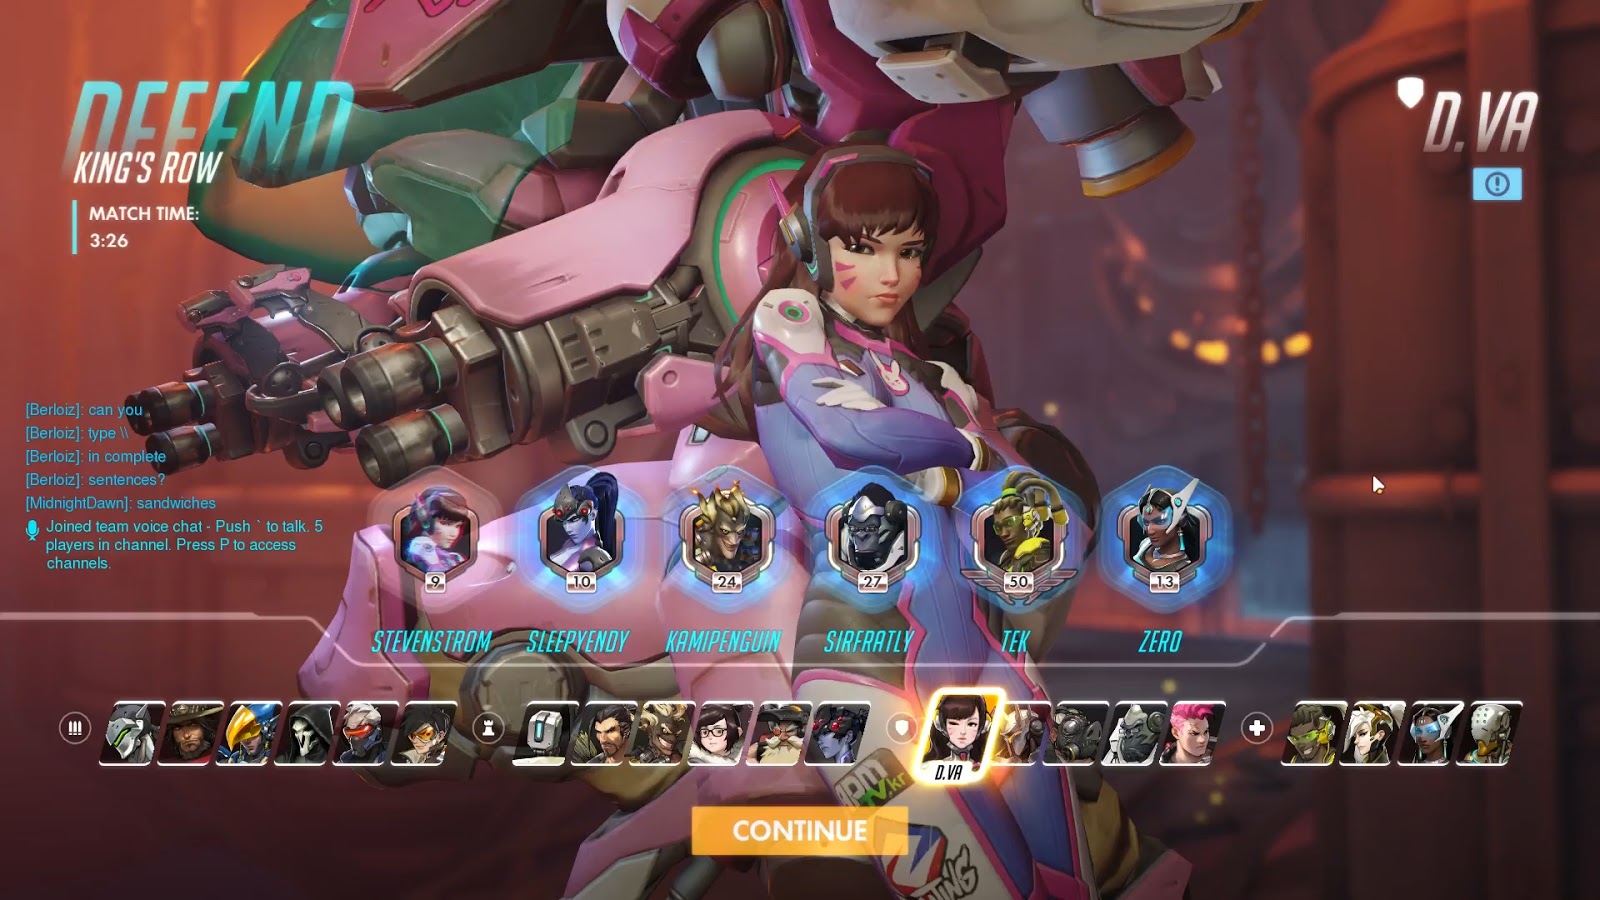 So I was playing Overwatch for a bit and found someone that